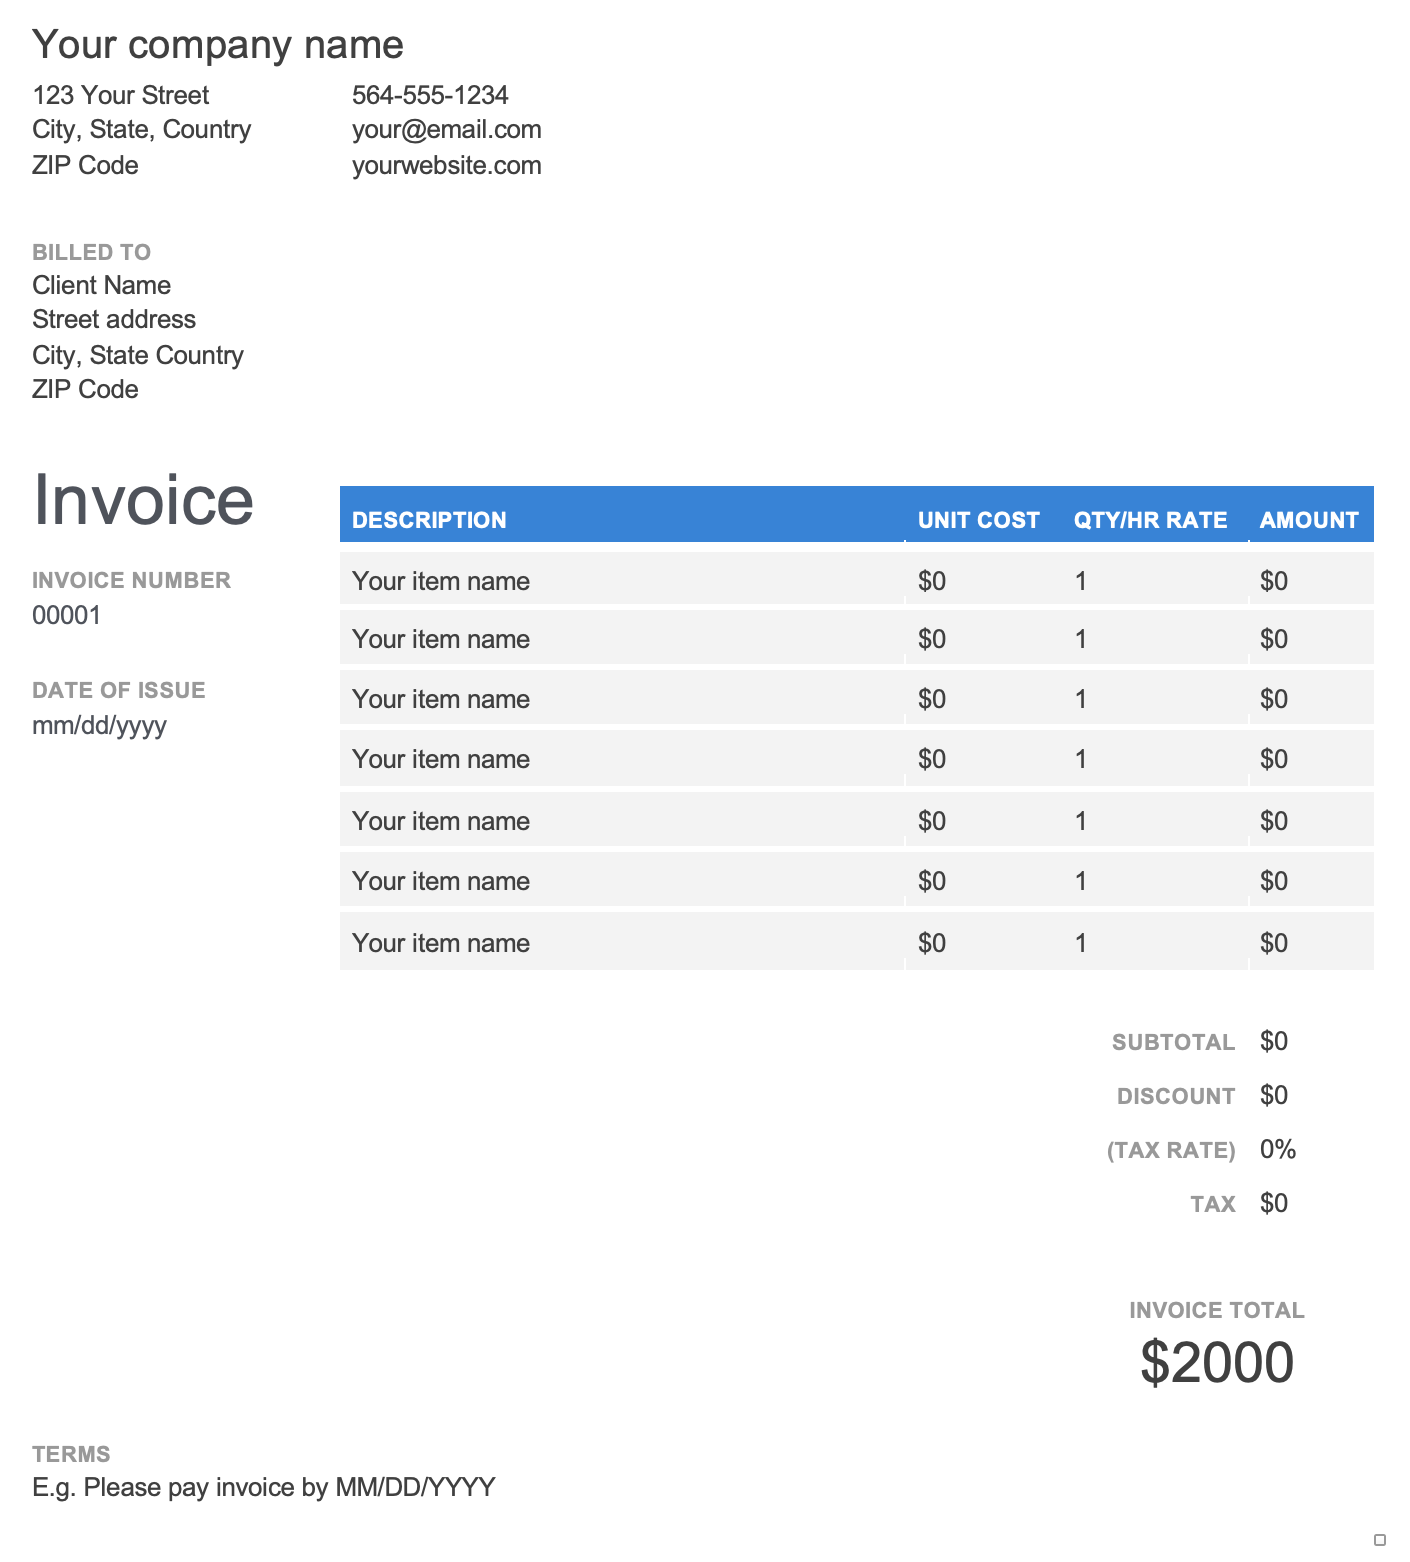 Automating Invoice Processing in Construction Companies